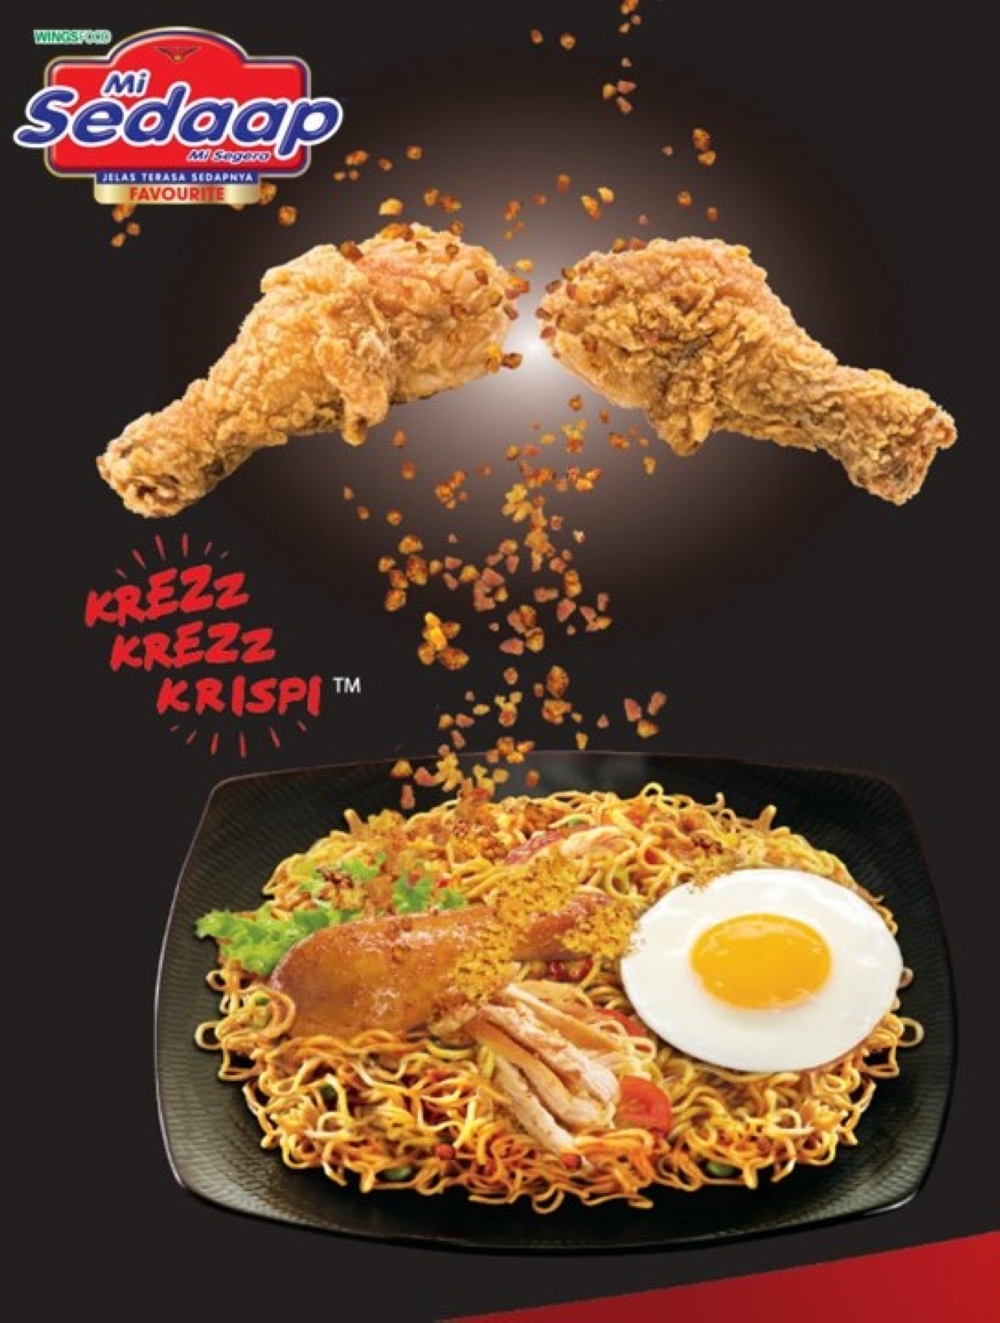 The Mi Sedaap Goreng Ayam Krispi comes with Kriuk-Kriuk ® fried onions coated with chicken taste — Picture courtesy of Gentle Supreme Sdn Bhd